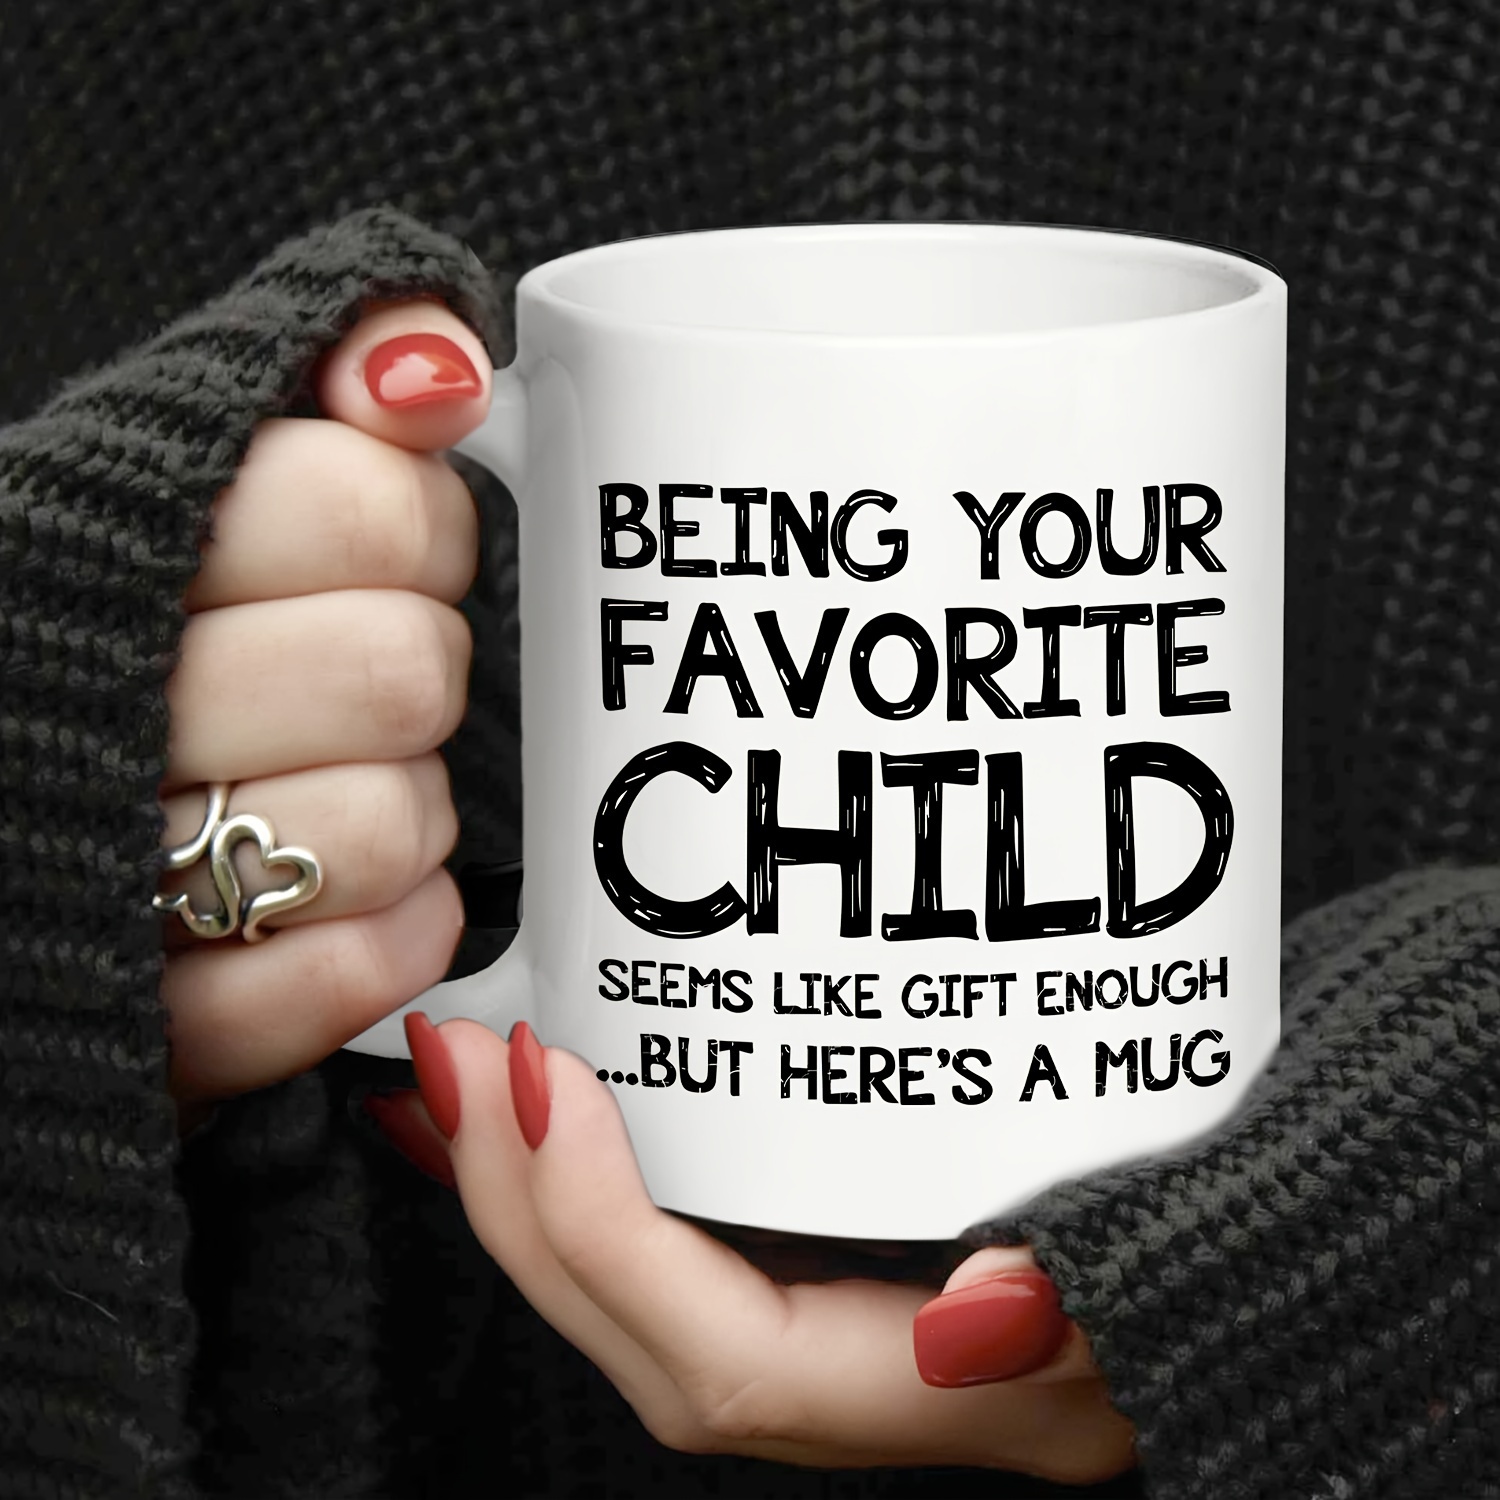 You Are A Great Mom Funny Coffee Mug - Best Mother's Day Gifts for Mom, Women - Unique Gag Mom Gifts from Daughter, Son, Kids - Top Birthday Present